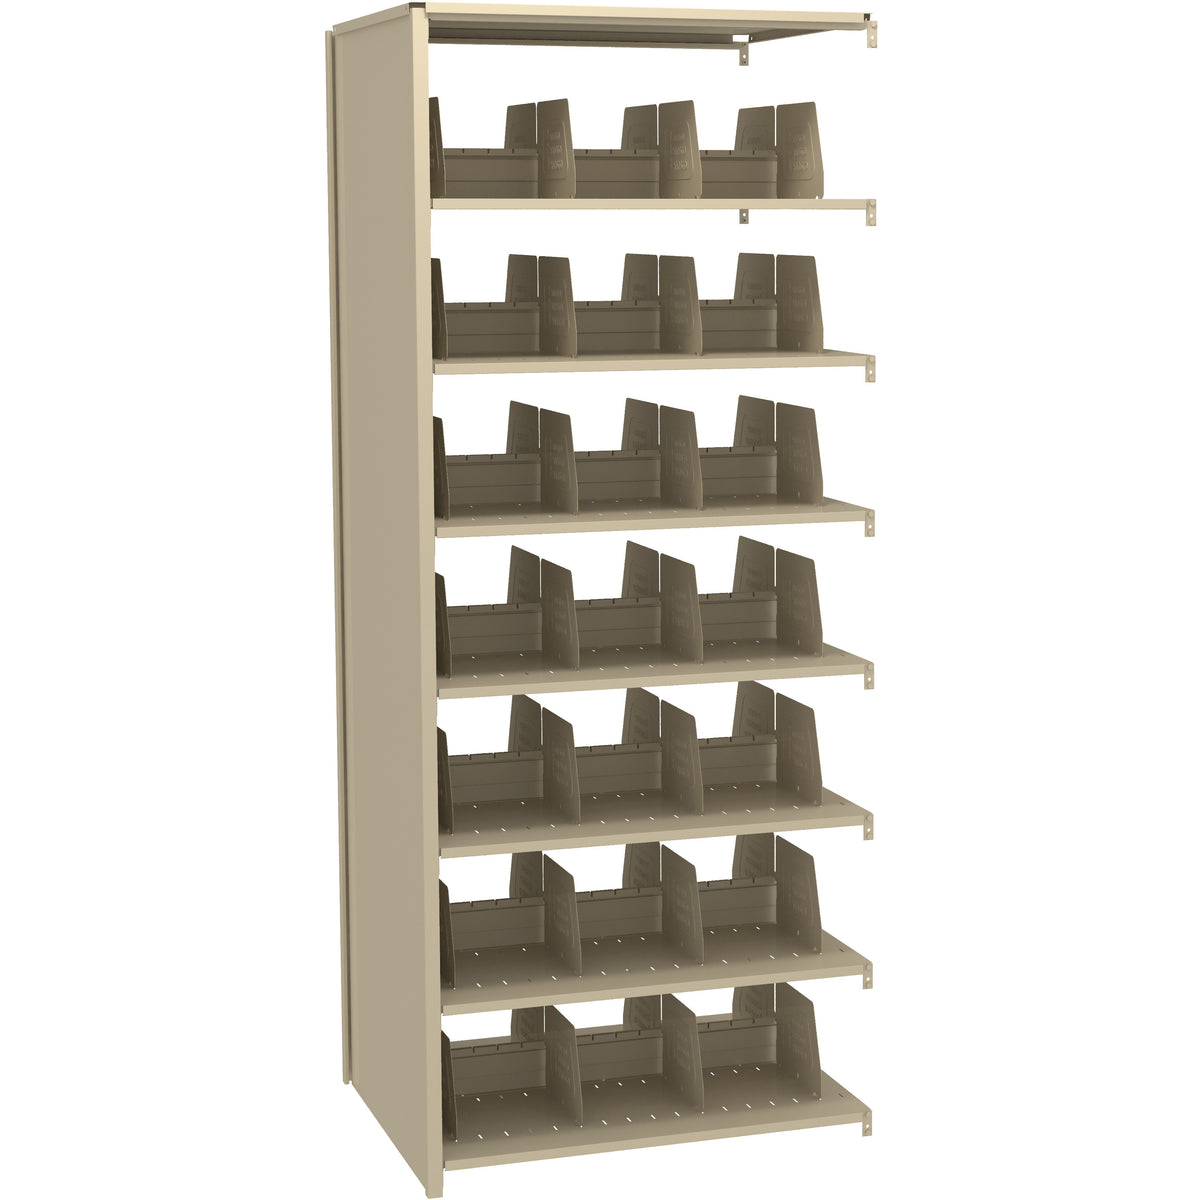 Tennsco 88" High Double Entry Imperial Shelving Adder Unit - 14 Openings, 3088AC